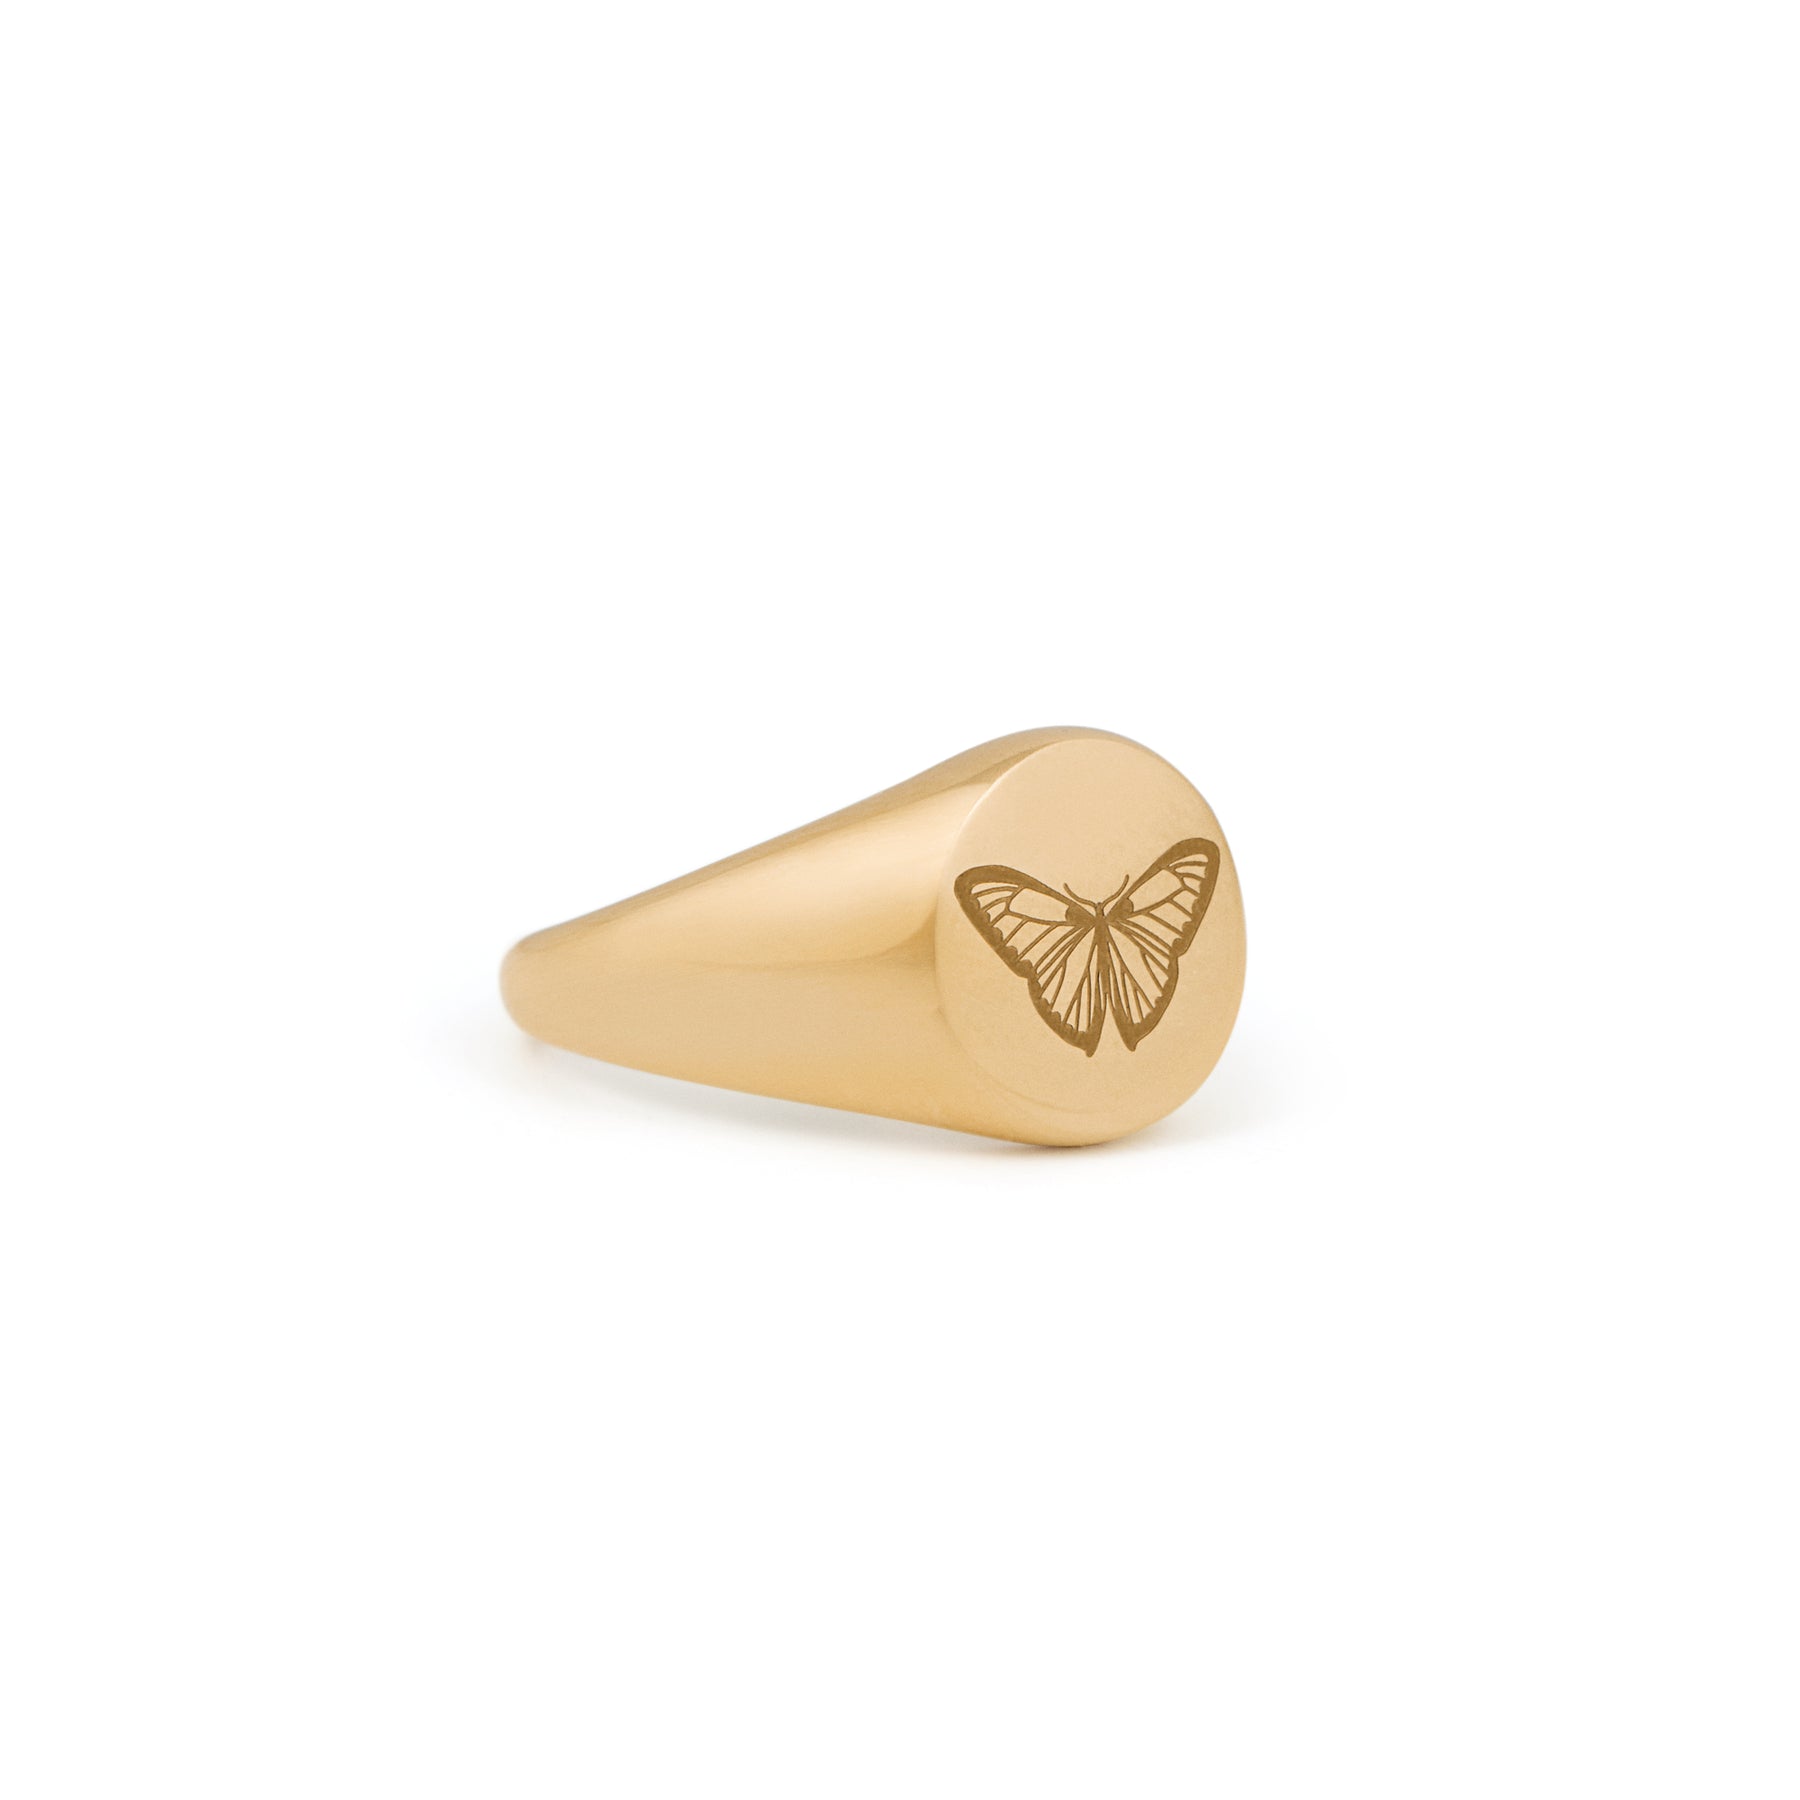 BUTTERFLY RING - GOLD PLATED